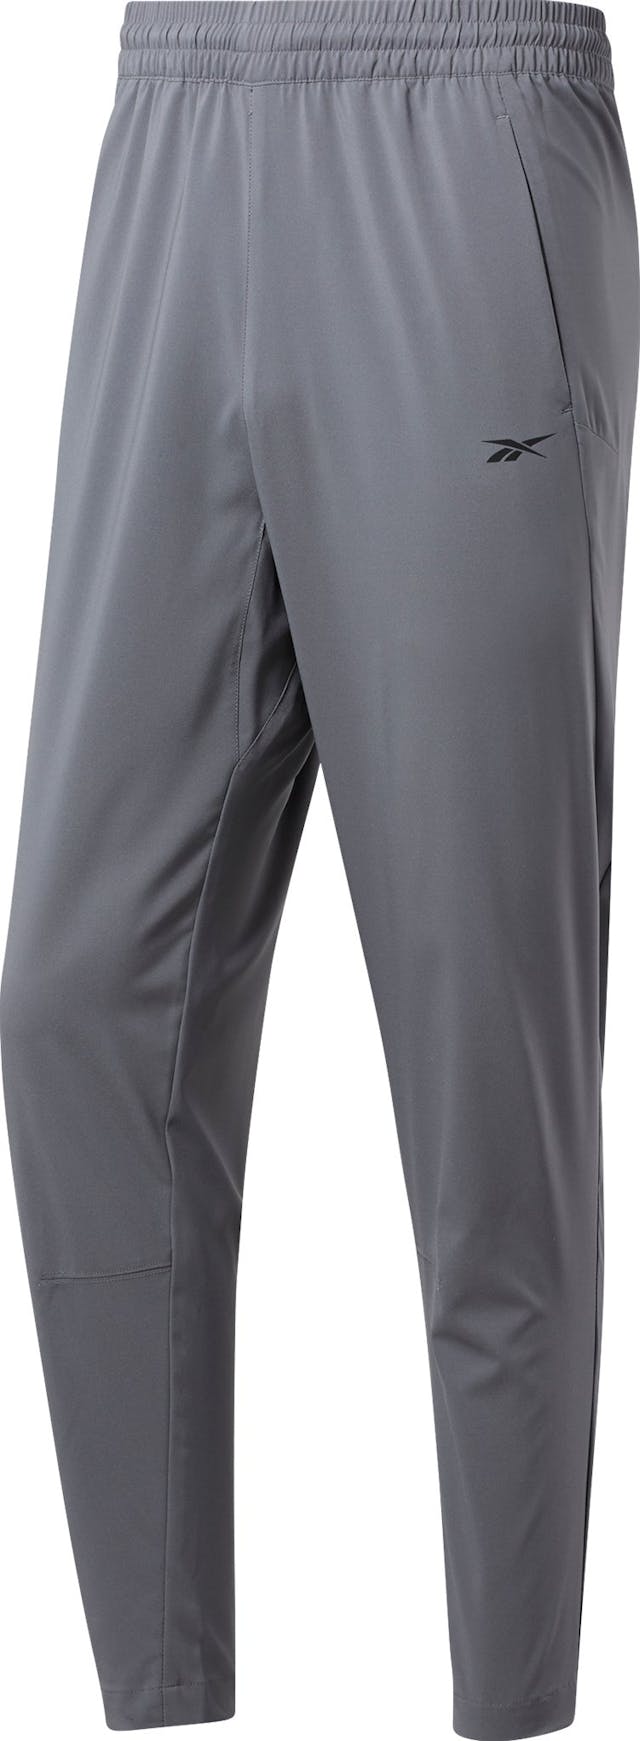 Product image for Workout Ready Track Pants - Men's